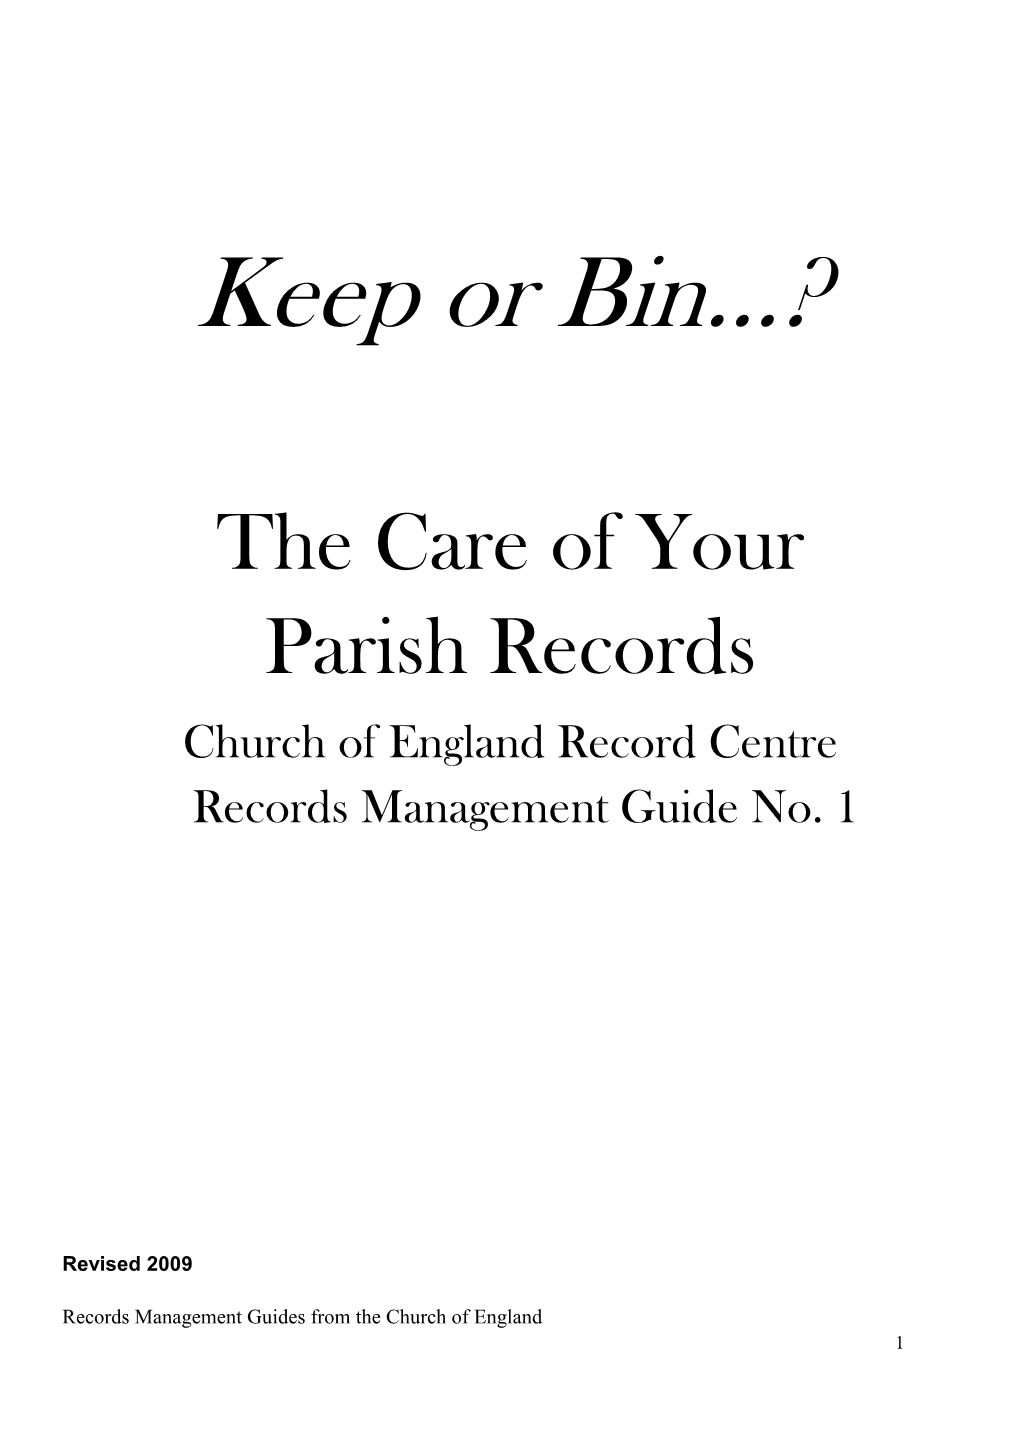 Keep Or Bin: Care of Your Parish Records